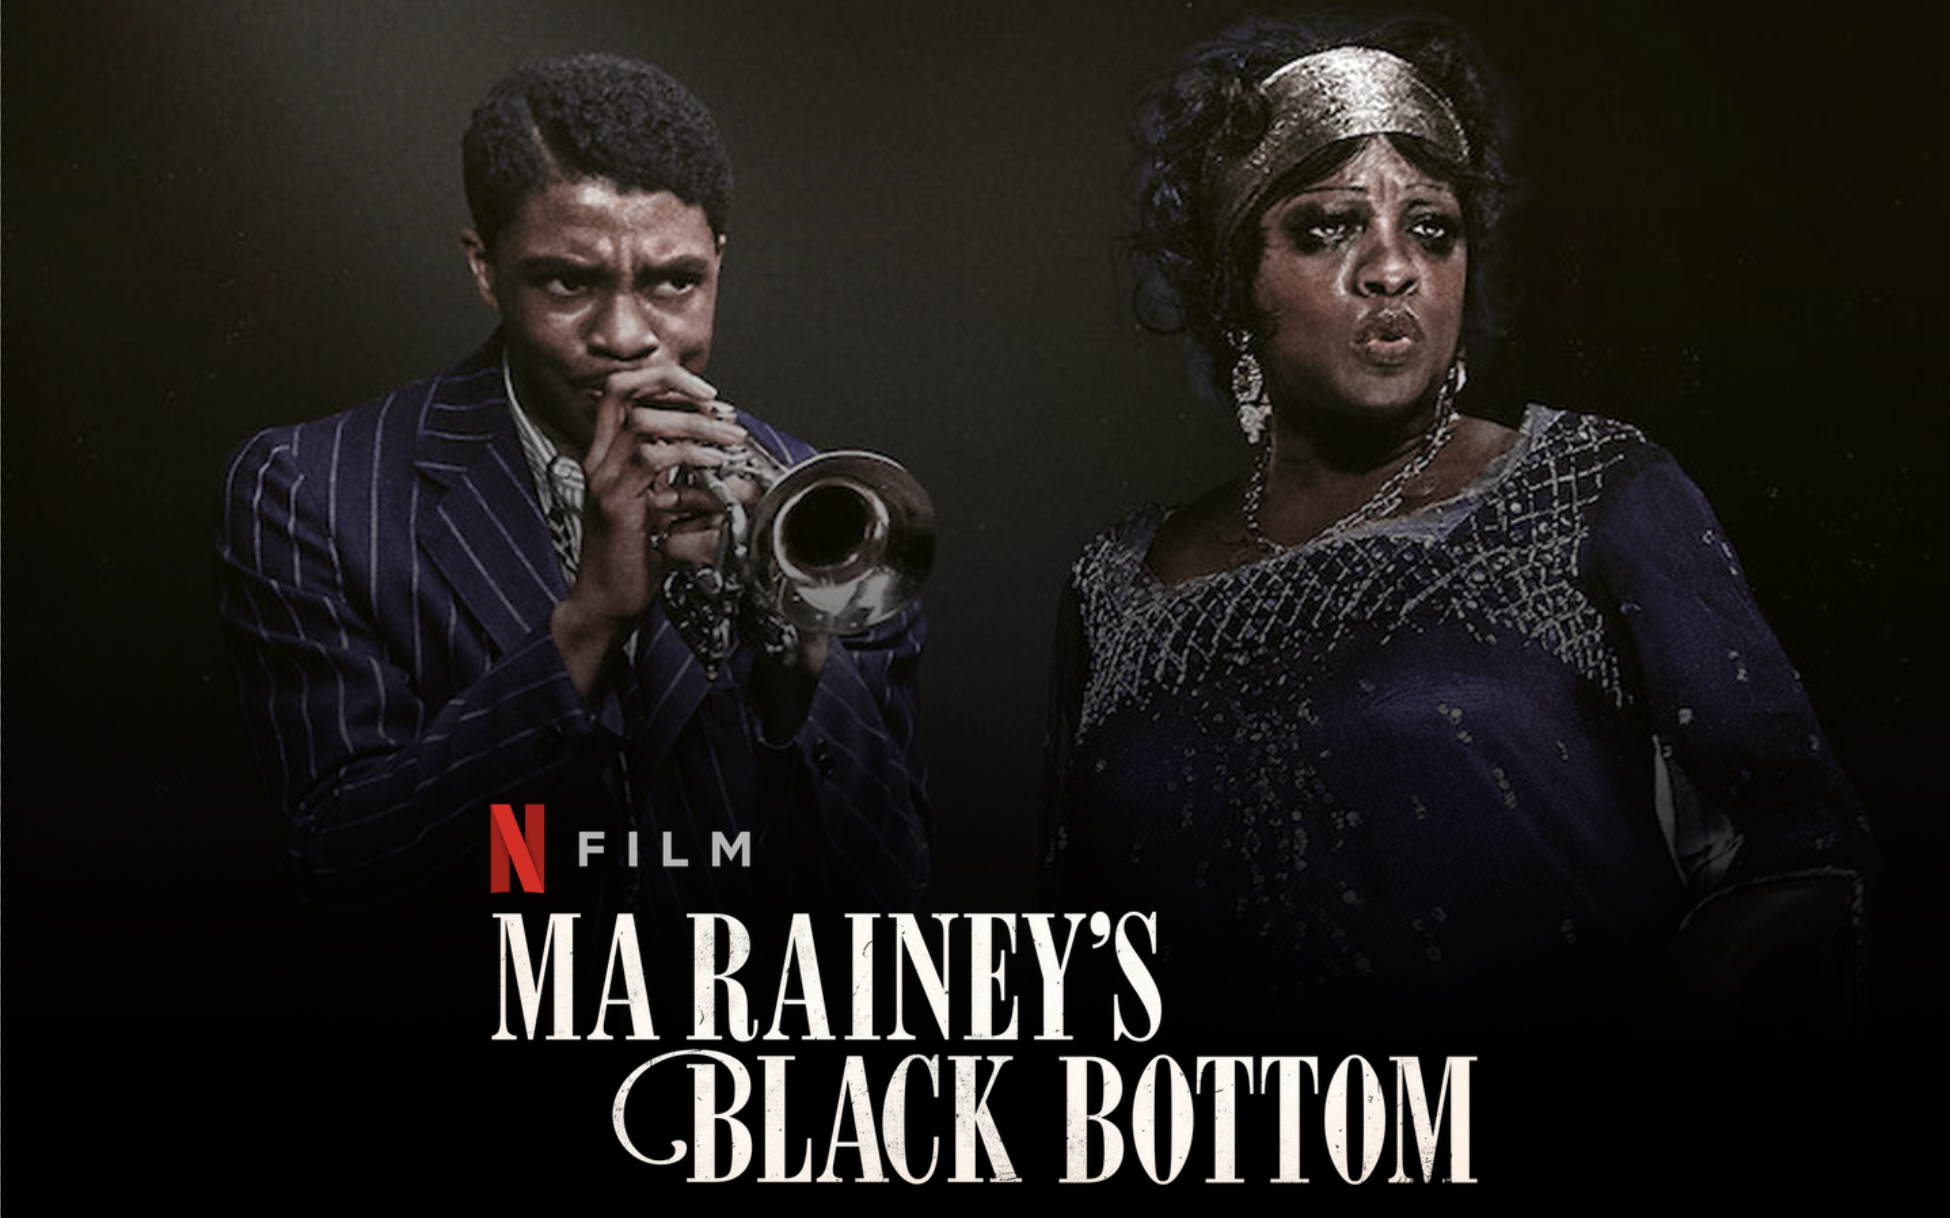 ‘Ma Rainey’s Black Bottom’ Bolstered By Brilliant Performances From Viola Davis And Chadwick Boseman – Review